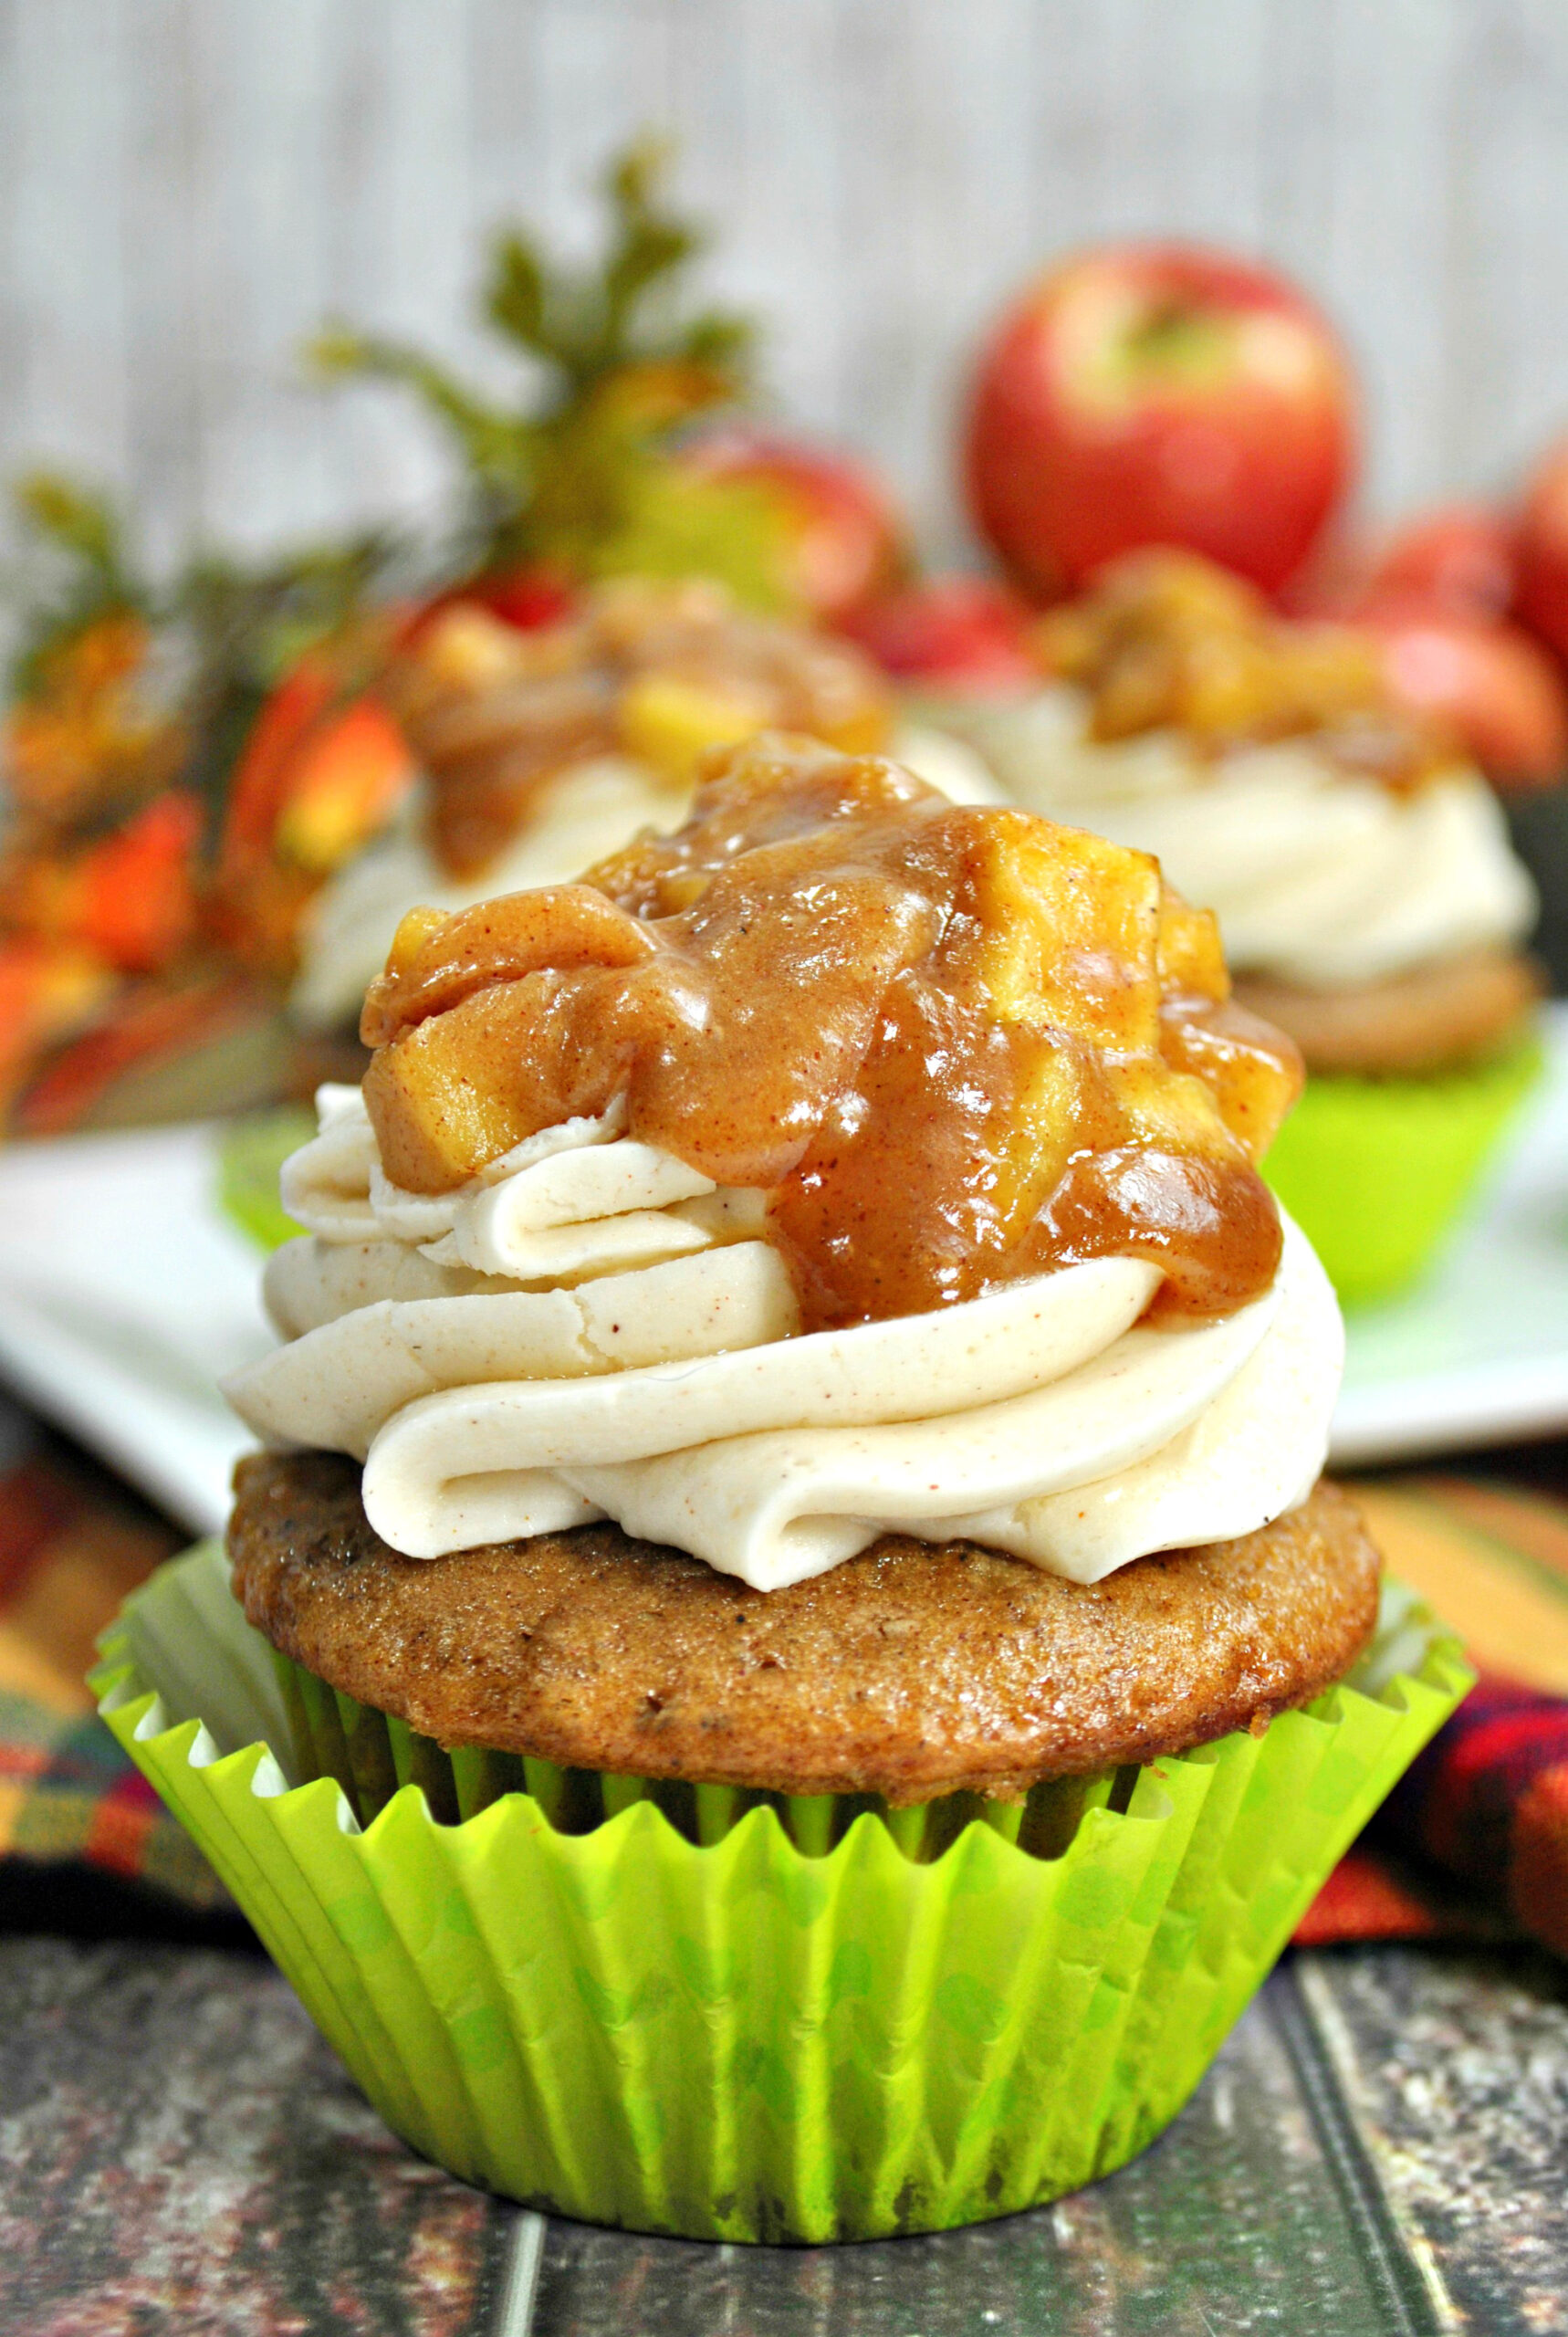 Apple Pie Cupcakes with Cinnamon Icing